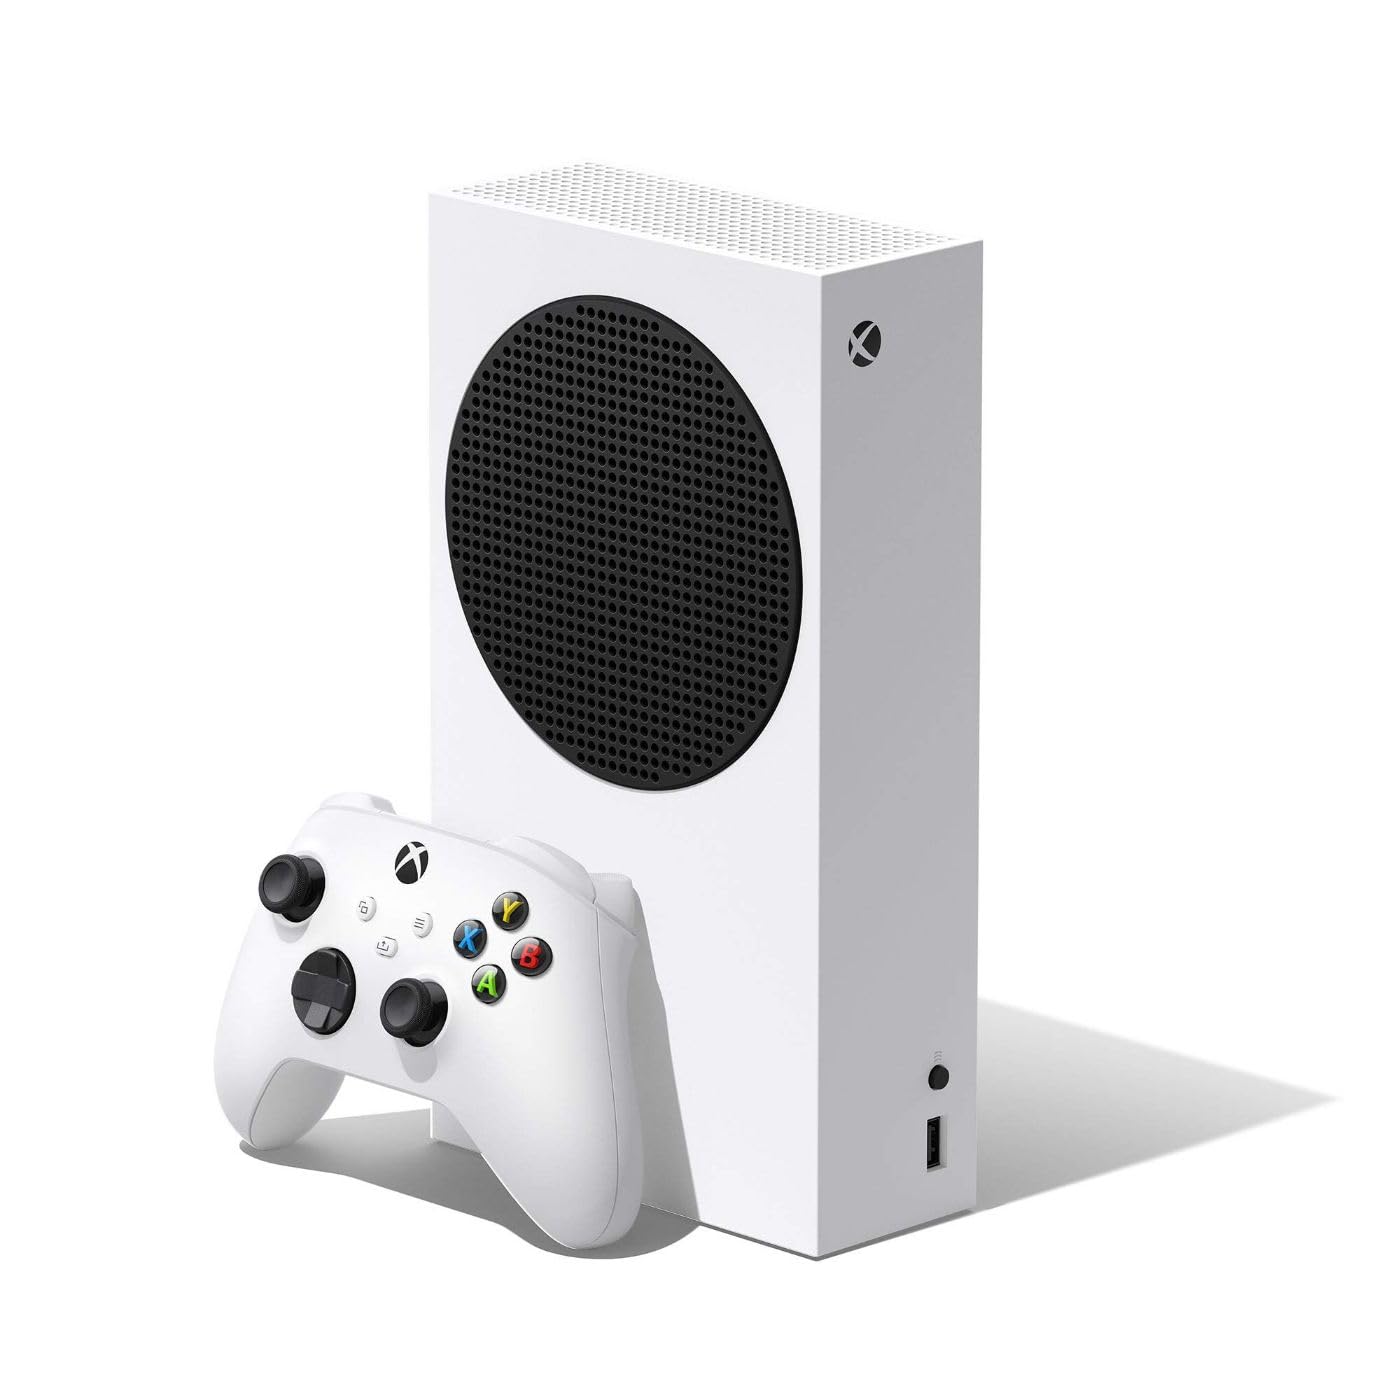 Microsoft Xbox Series S 512GB SSD Console - Includes Xbox Wireless Controller - Up to 120 frames per second - 10GB RAM 512GB SSD - Experience high dynamic range - Xbox Velocity Architecture